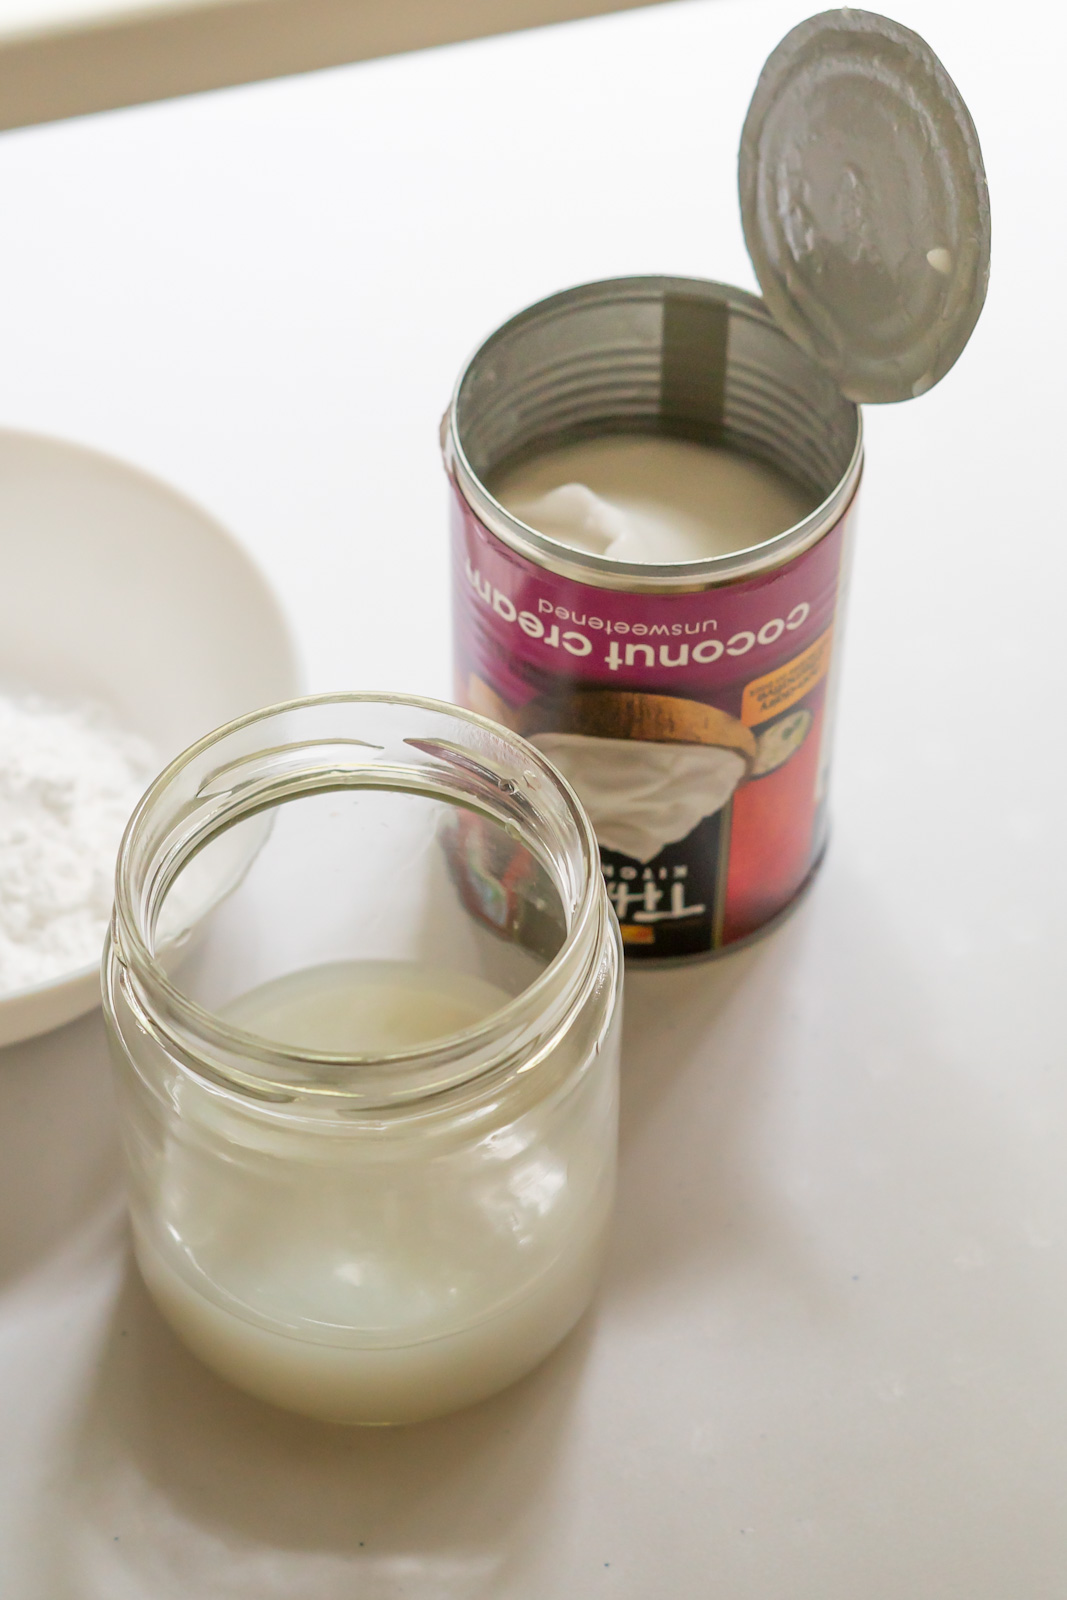 A can of coconut cream opened at the bottom with the liquid poured off into a separate jar.